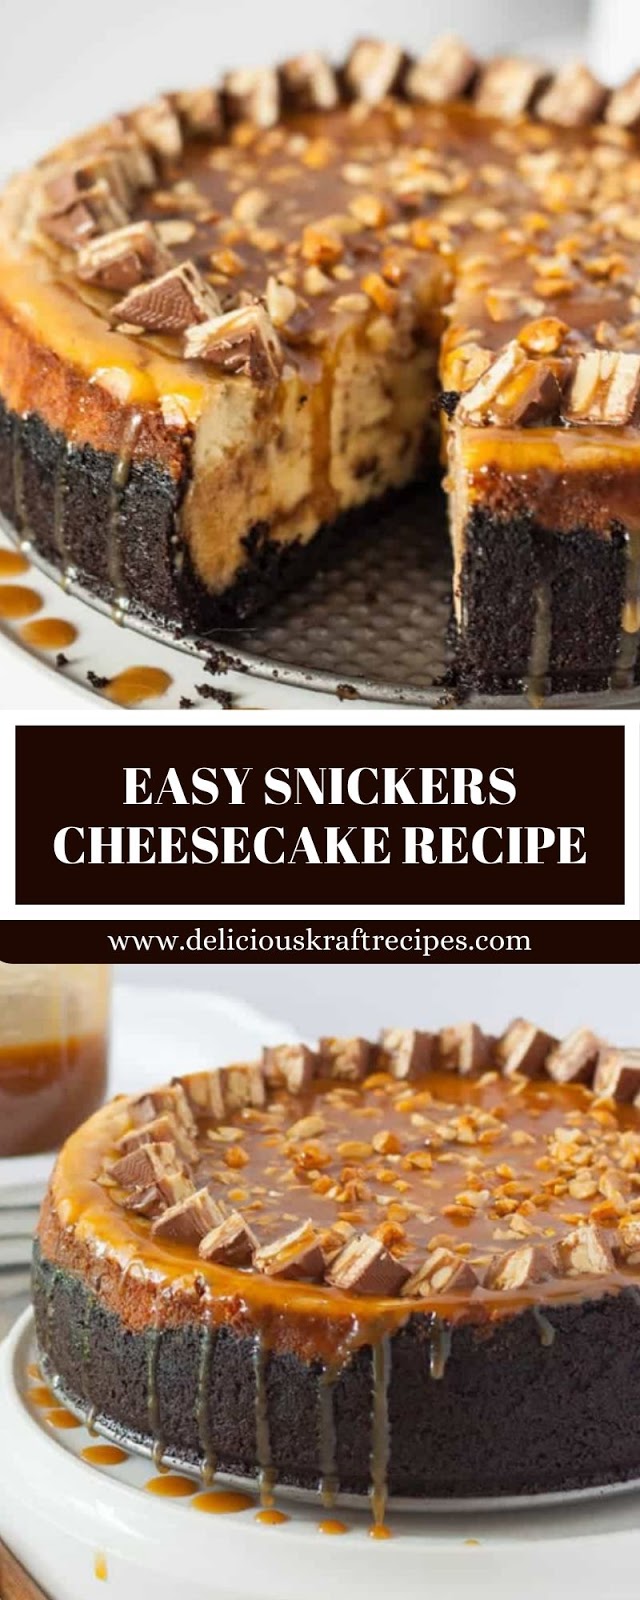 EASY SNICKERS CHEESECAKE RECIPE